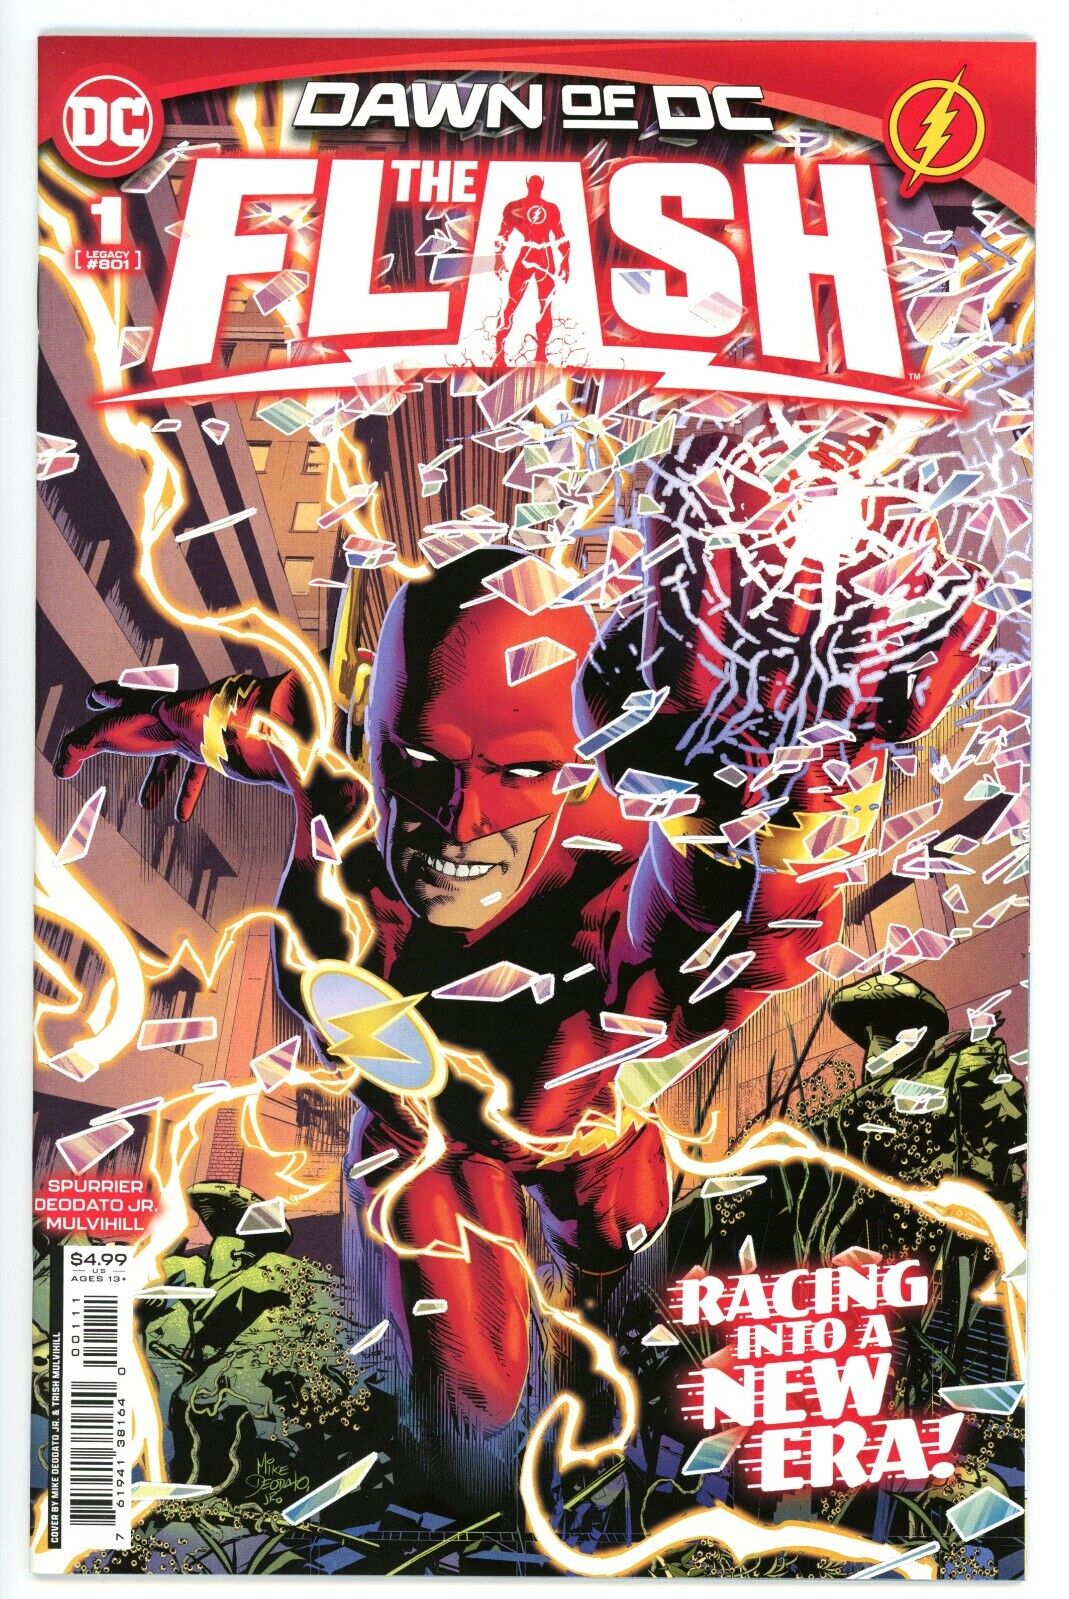 The Flash #1   |   Cover A   |    NM  NEW   ⚡NO STOCK PHOTOS ⚡